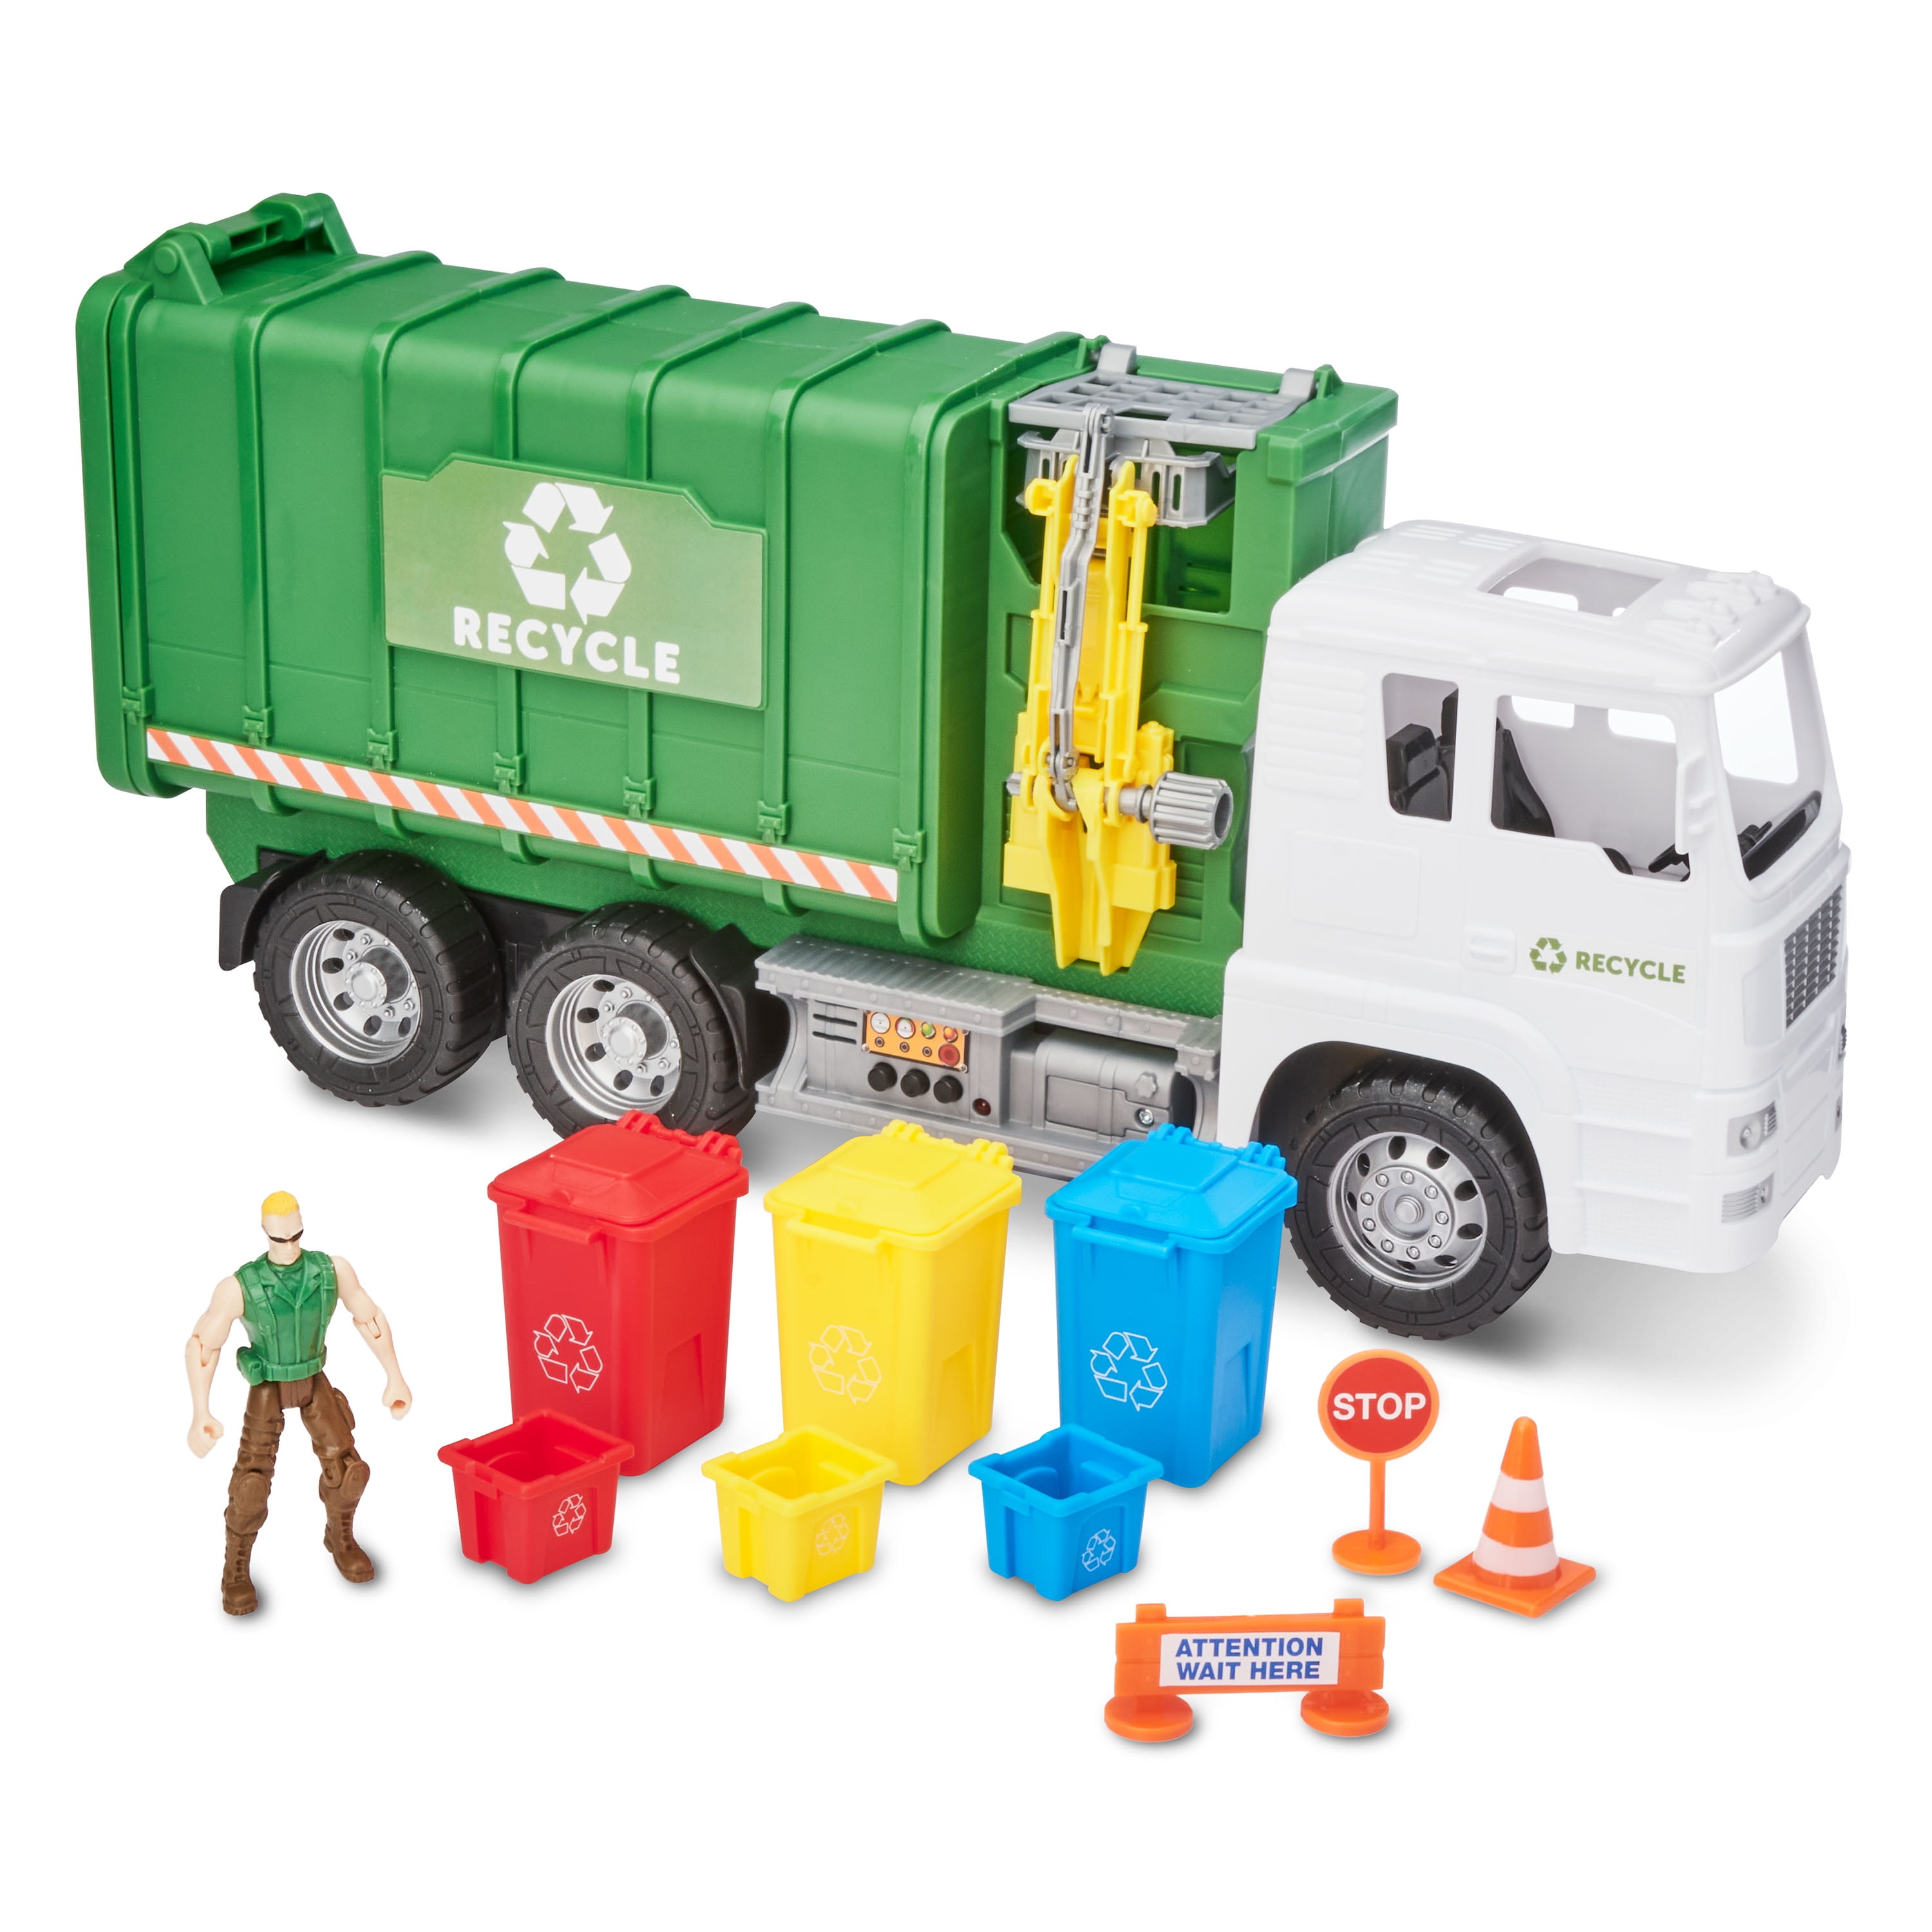 A ZzCityTK Remote control engineering vehicle/Sanitation garbage recycling truck/Fire truck toy,Construction Engineering Vehicles toy,For Children Holiday christmas birthday gift 